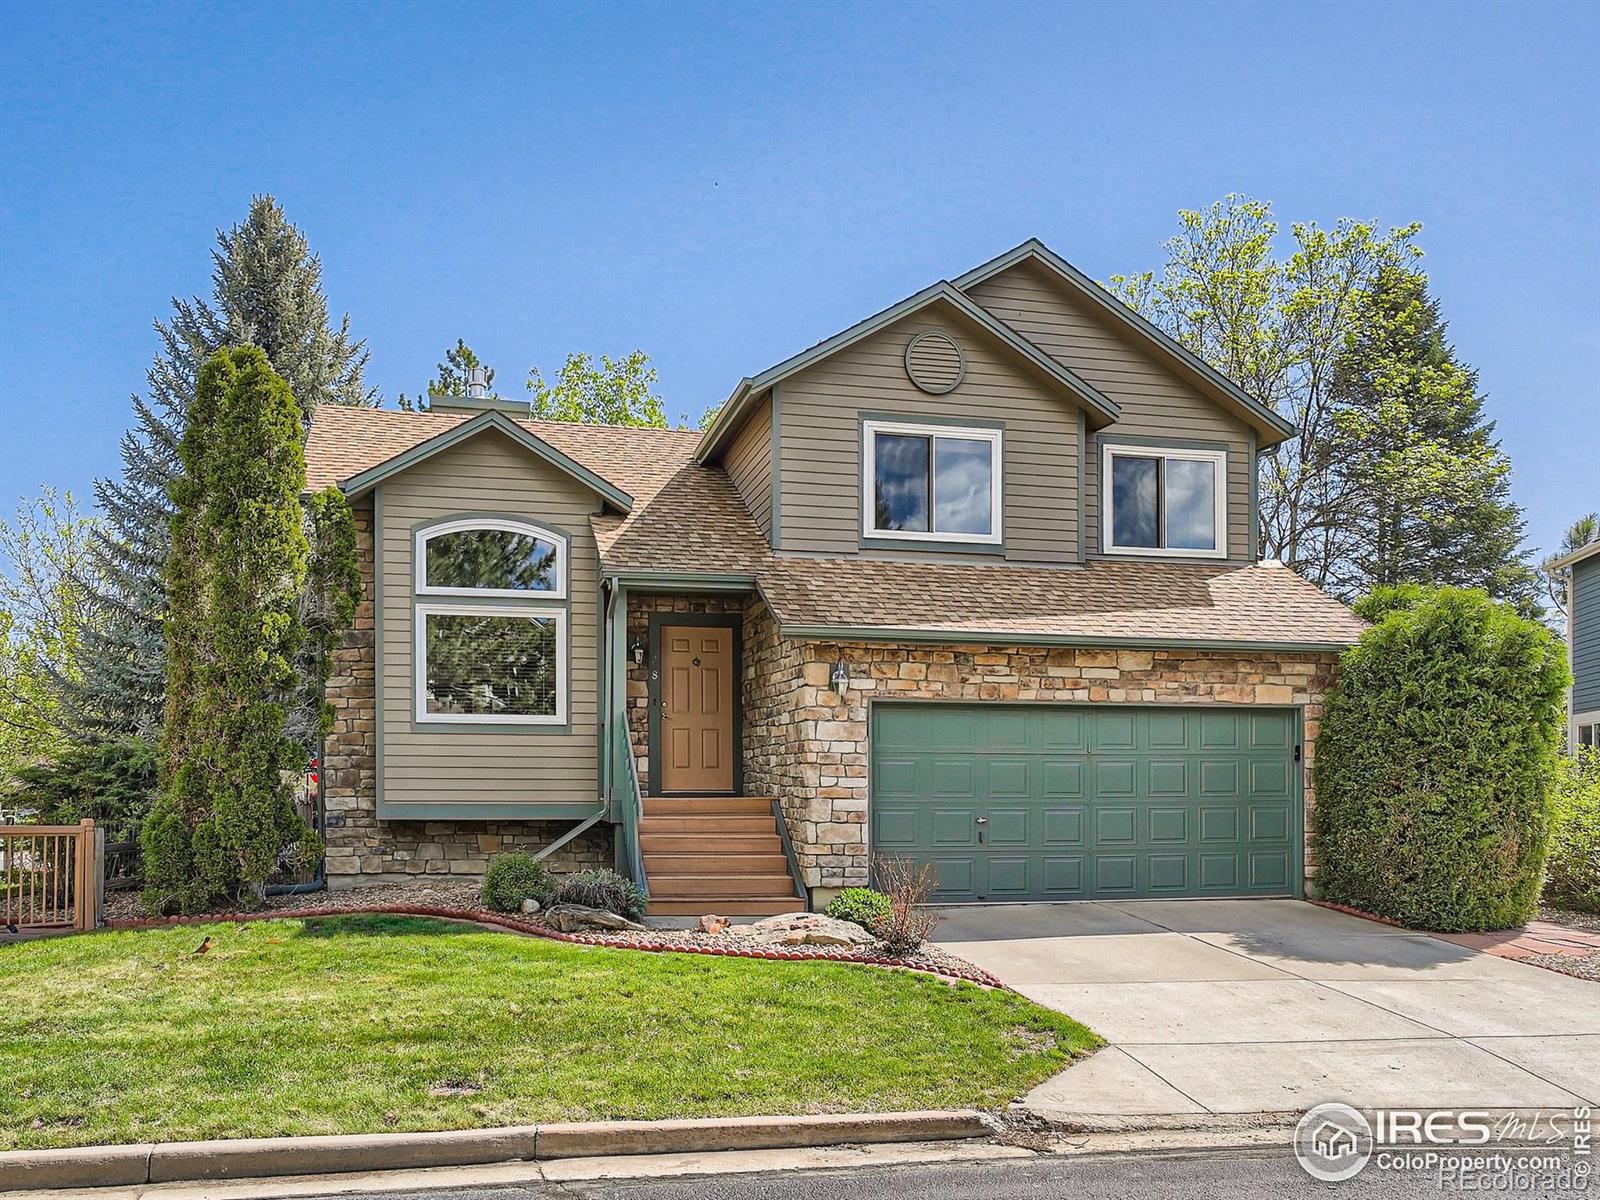 Report Image for 5458  Glendale Gulch Circle,Boulder, Colorado